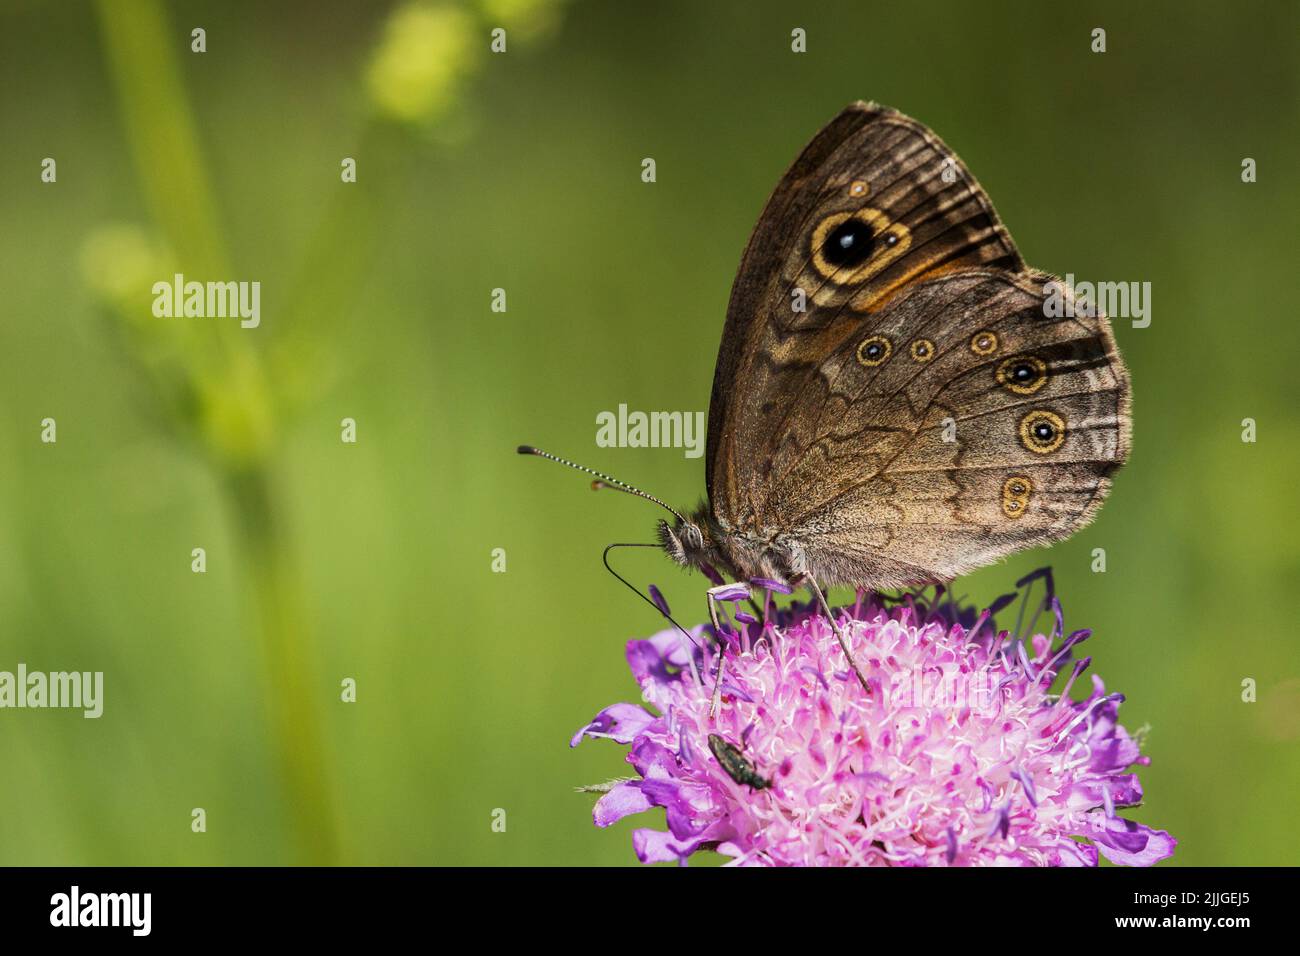 An European butterfly, the Large wall brown drinking nectar on a pinkish meadow flower during a sunny day in Estonia Stock Photo